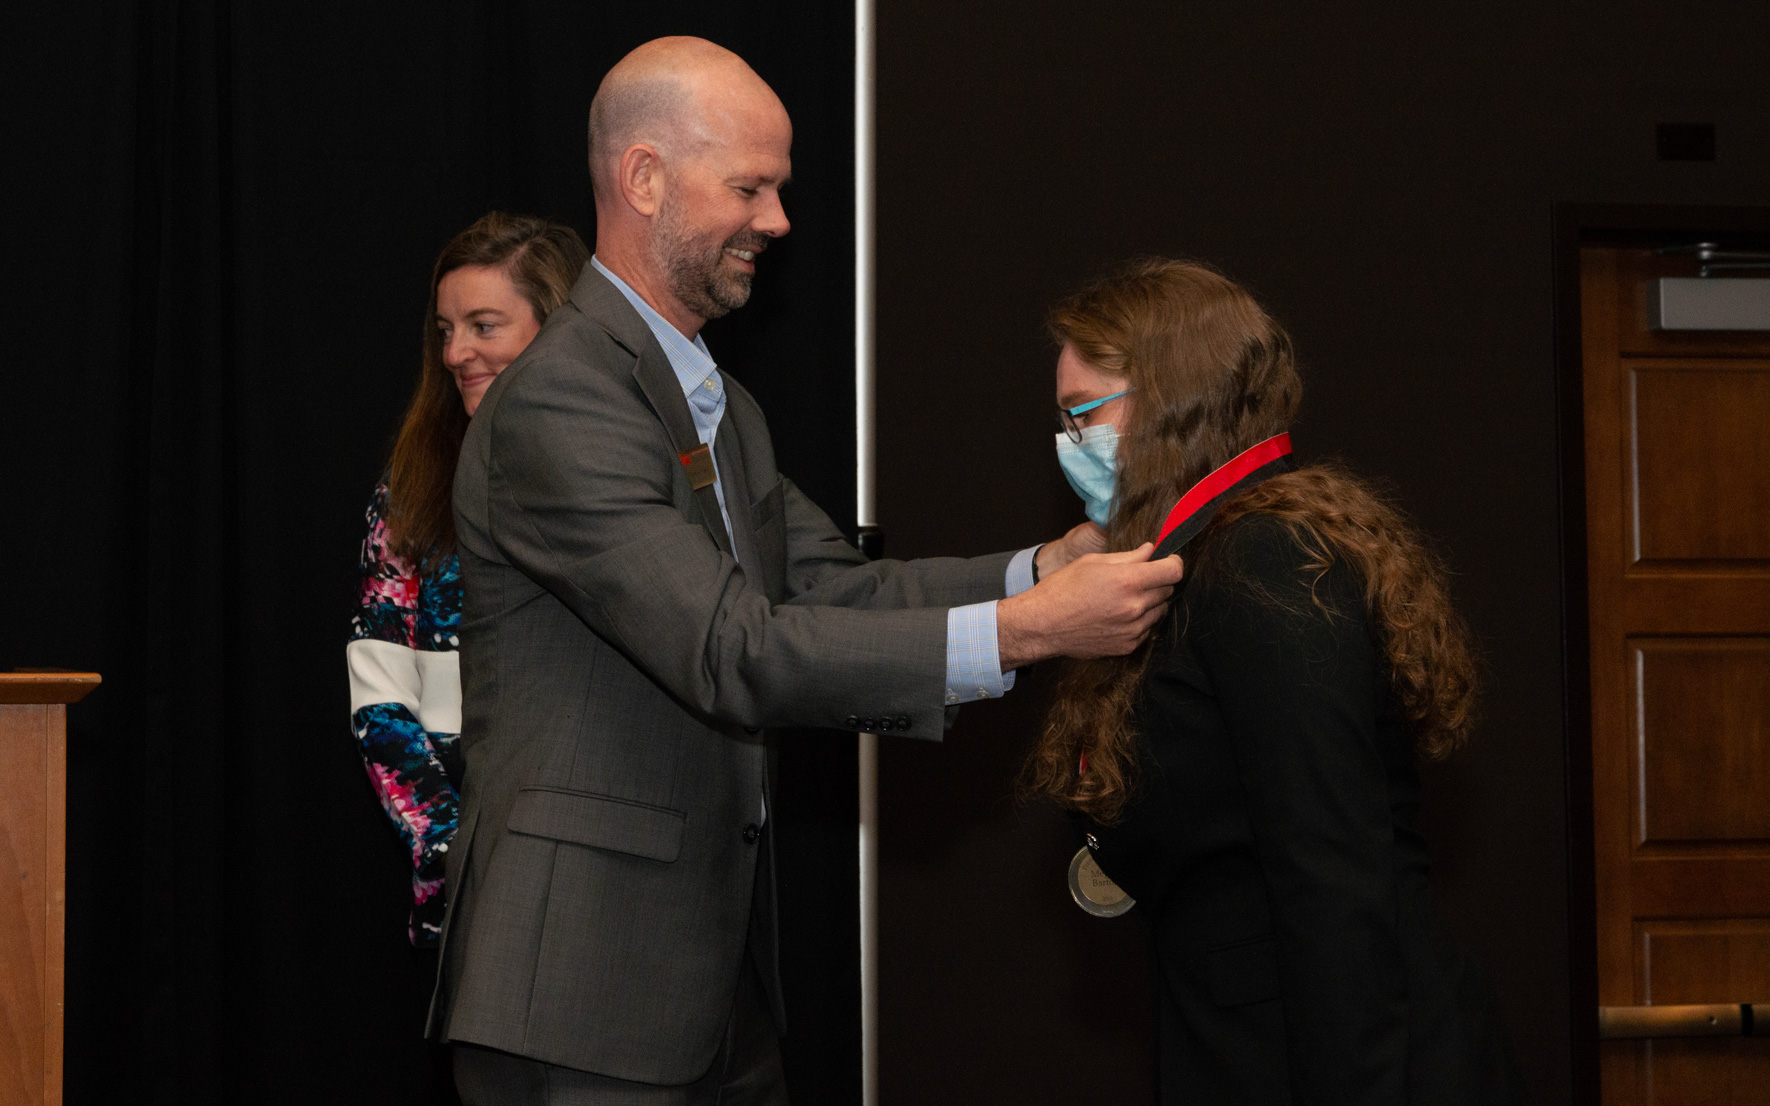 Foundation Executive Director Brad Tuininga presenting a student with a Presidents Medal